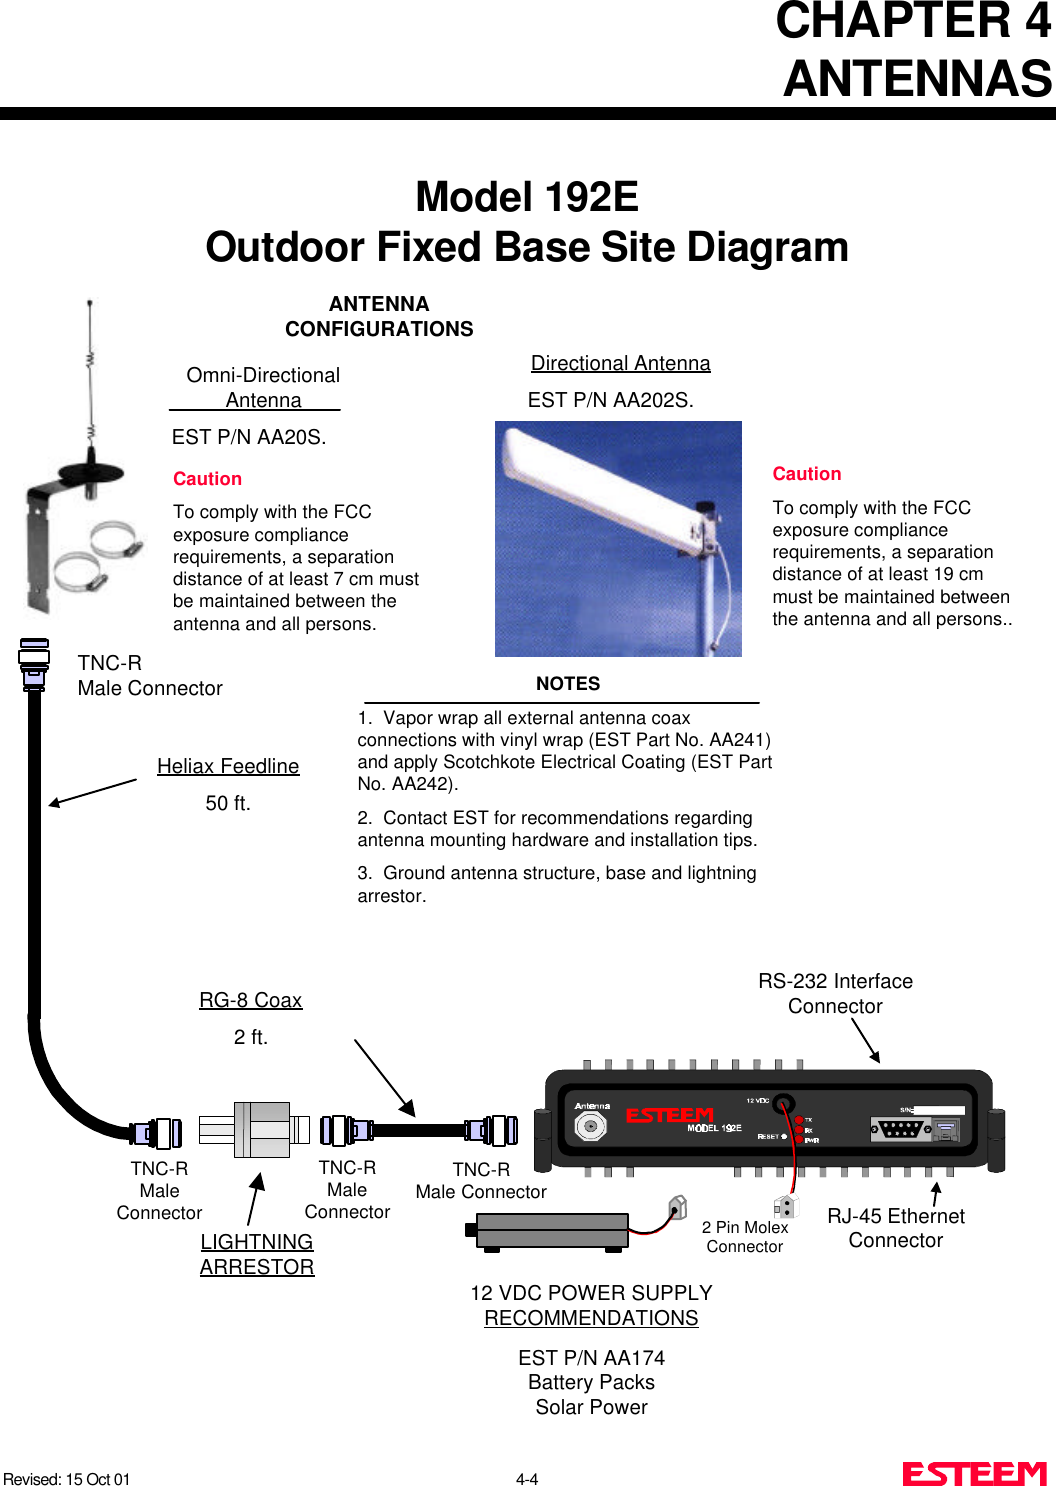 CHAPTER 4ANTENNASRevised: 15 Oct 01 4-4Model 192EOutdoor Fixed Base Site DiagramANTENNACONFIGURATIONSHeliax Feedline50 ft.TNC-RMale ConnectorLIGHTNINGARRESTOR12 VDC POWER SUPPLYRECOMMENDATIONSEST P/N AA174Battery PacksSolar Power2 Pin MolexConnectorRG-8 Coax2 ft.RS-232 InterfaceConnectorDirectional AntennaEST P/N AA202S.Omni-DirectionalAntennaEST P/N AA20S.CautionTo comply with the FCCexposure compliancerequirements, a separationdistance of at least 7 cm mustbe maintained between theantenna and all persons.CautionTo comply with the FCCexposure compliancerequirements, a separationdistance of at least 19 cmmust be maintained betweenthe antenna and all persons..RJ-45 EthernetConnectorNOTES1.  Vapor wrap all external antenna coaxconnections with vinyl wrap (EST Part No. AA241)and apply Scotchkote Electrical Coating (EST PartNo. AA242).2.  Contact EST for recommendations regardingantenna mounting hardware and installation tips.3.  Ground antenna structure, base and lightningarrestor.TNC-RMale ConnectorTNC-RMaleConnectorTNC-RMaleConnector